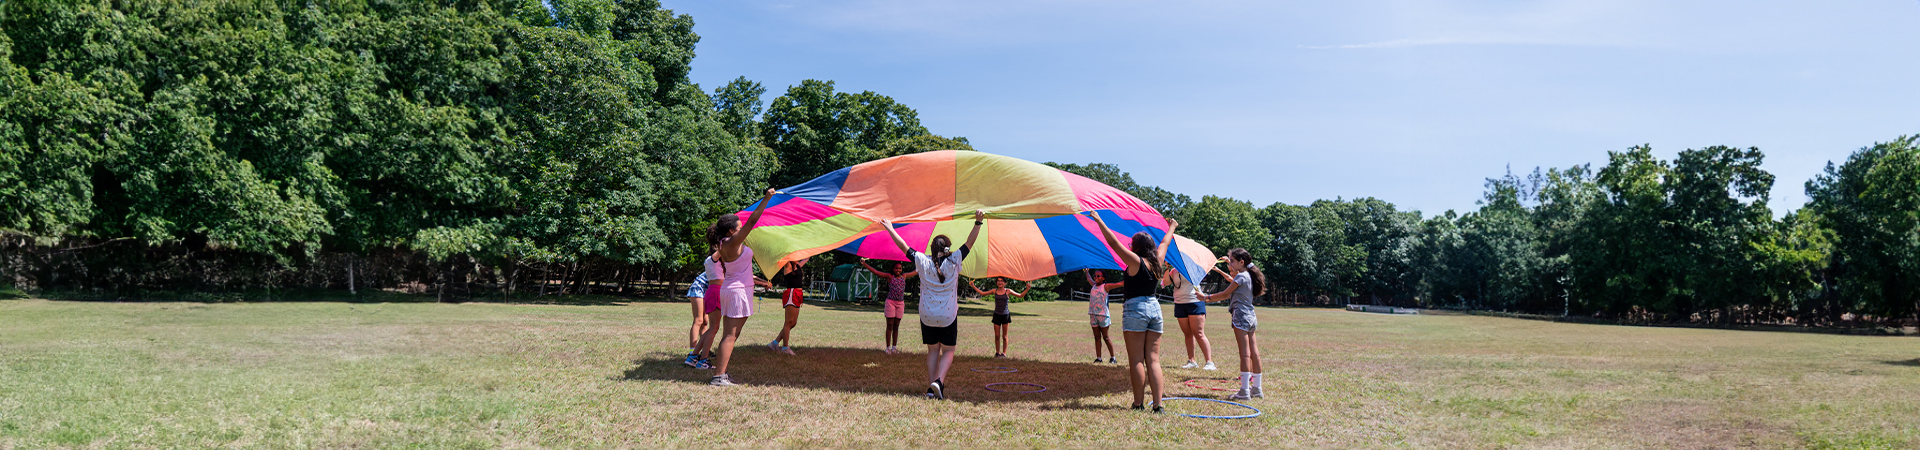  girls outside in a field playing with a colorful parachute 